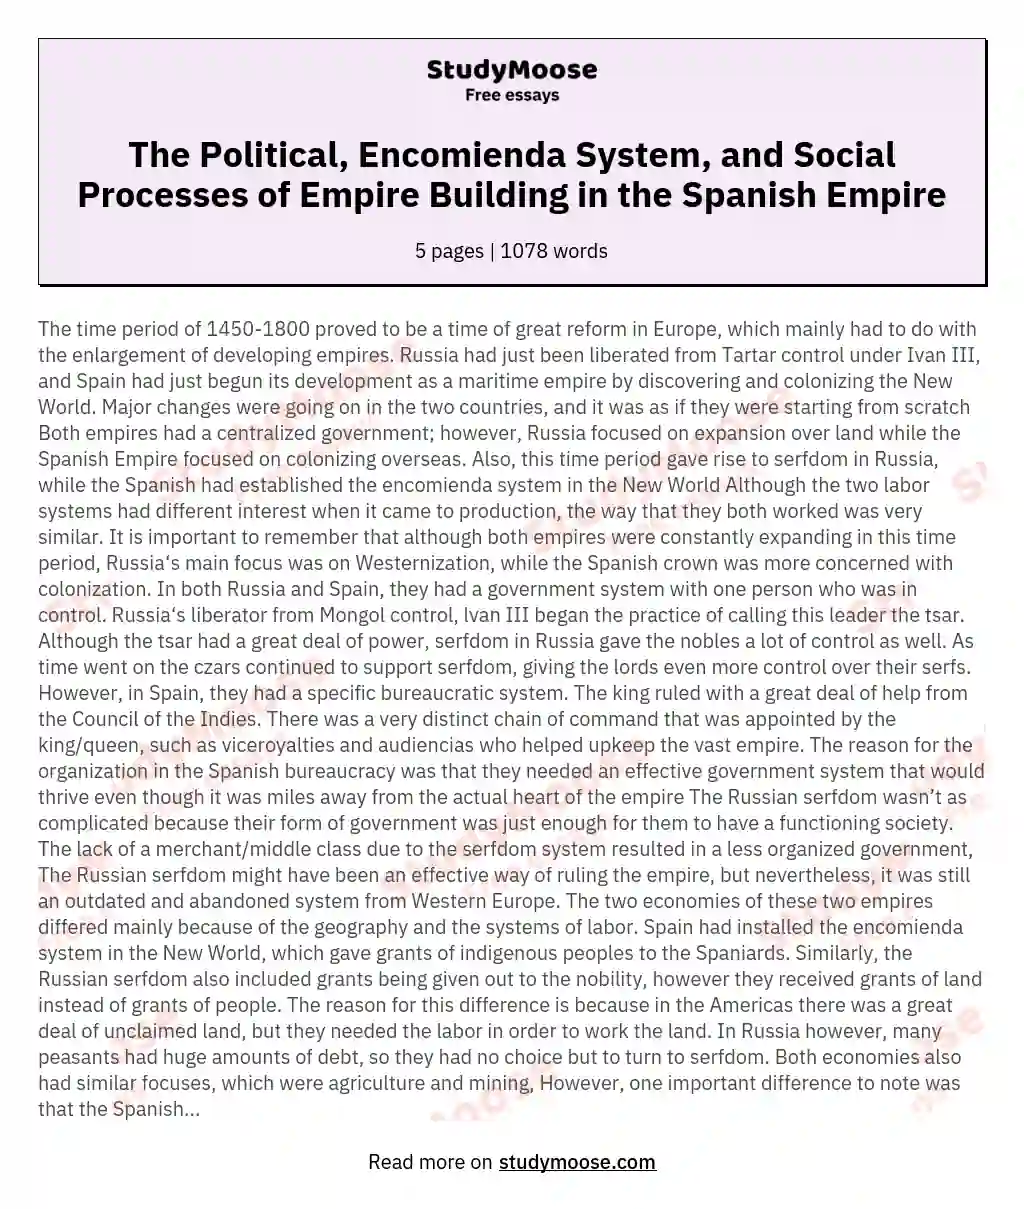 The Political, Encomienda System, and Social Processes of Empire Building in the Spanish Empire essay